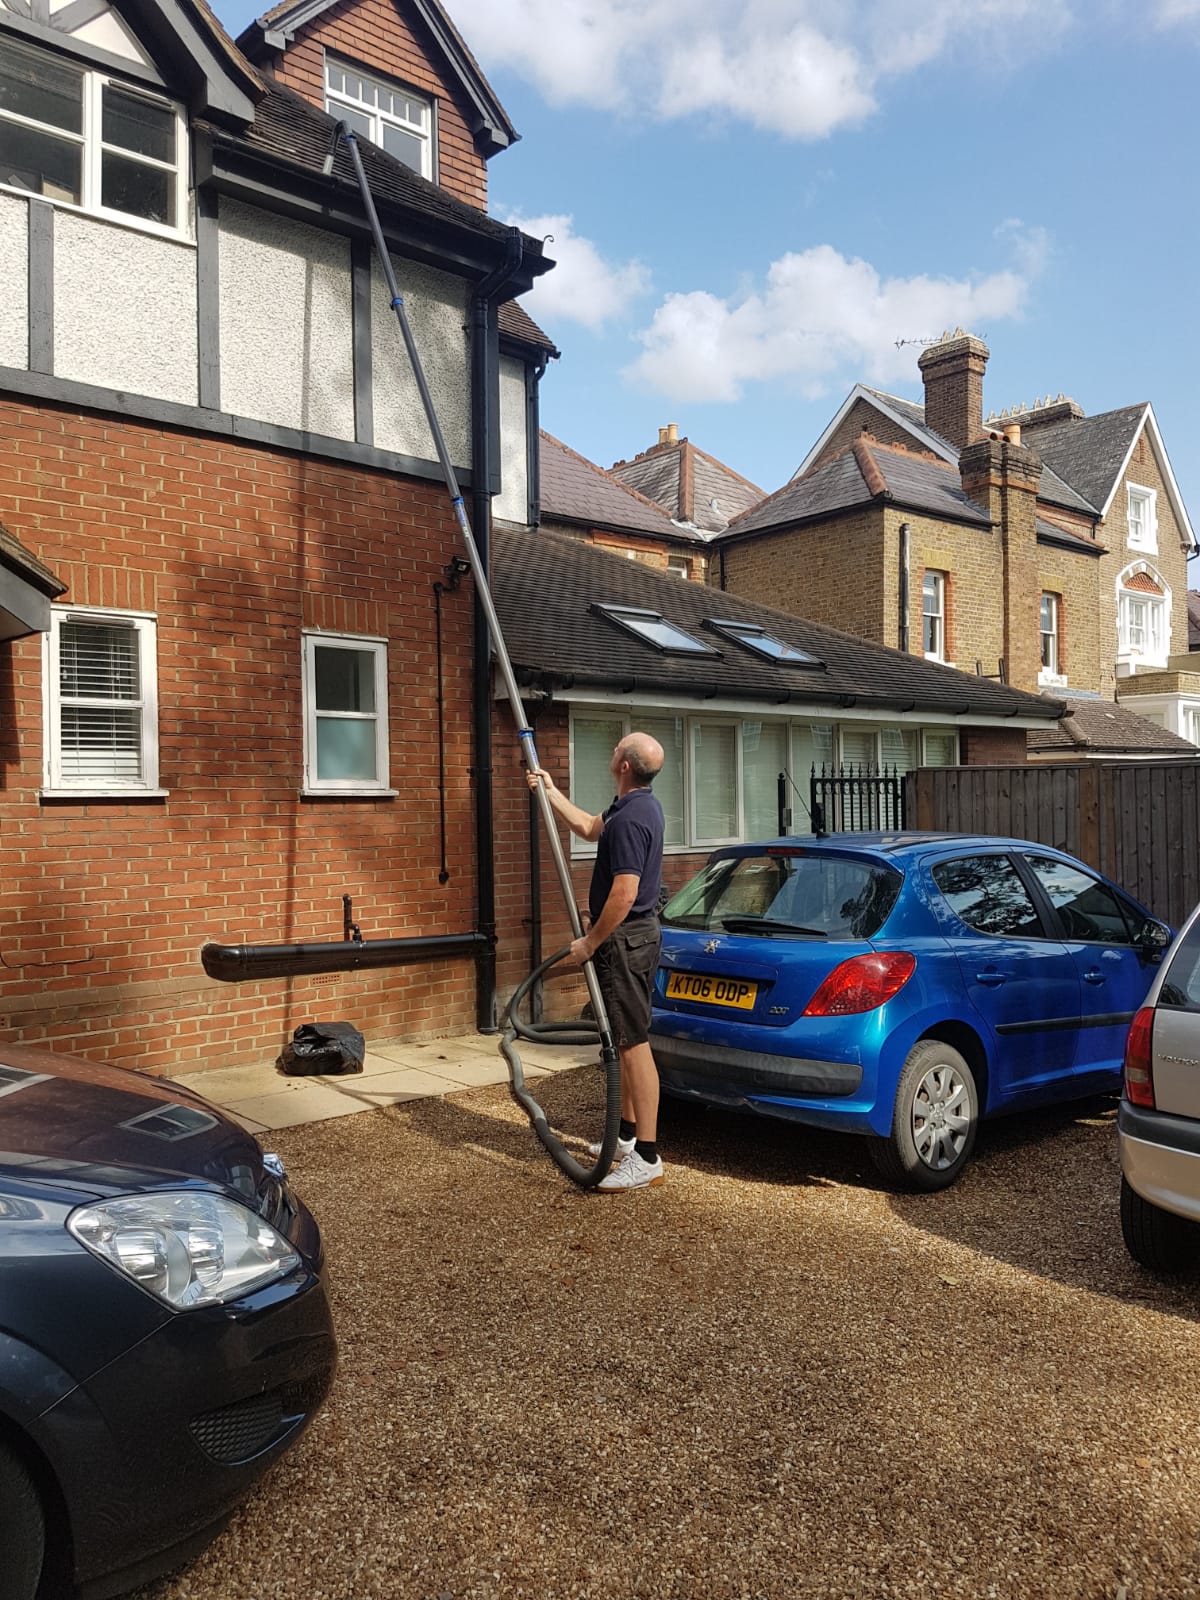 Cleaning and repairing gutters Staines-upon-Thames